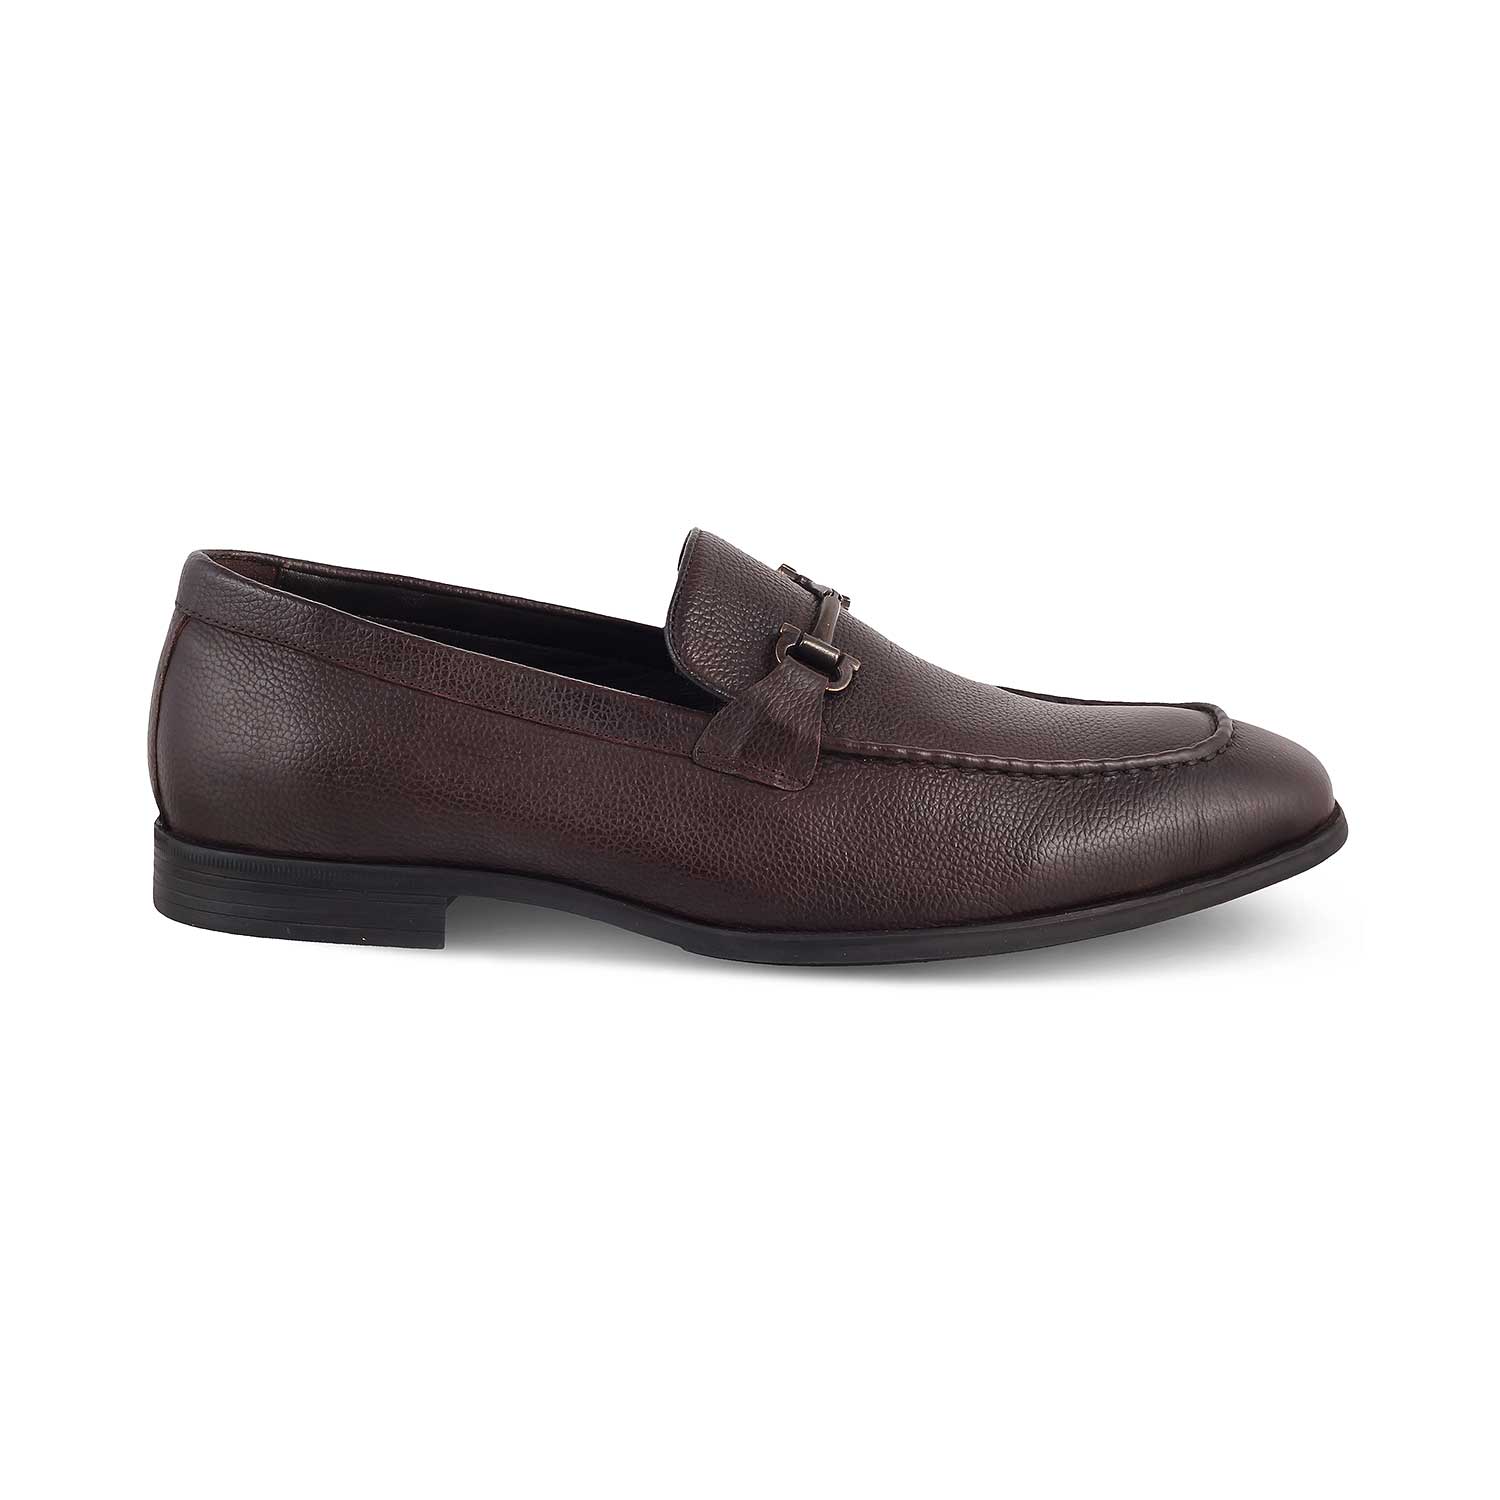 The Tumac Brown Men's Leather Loafers Tresmode - Tresmode